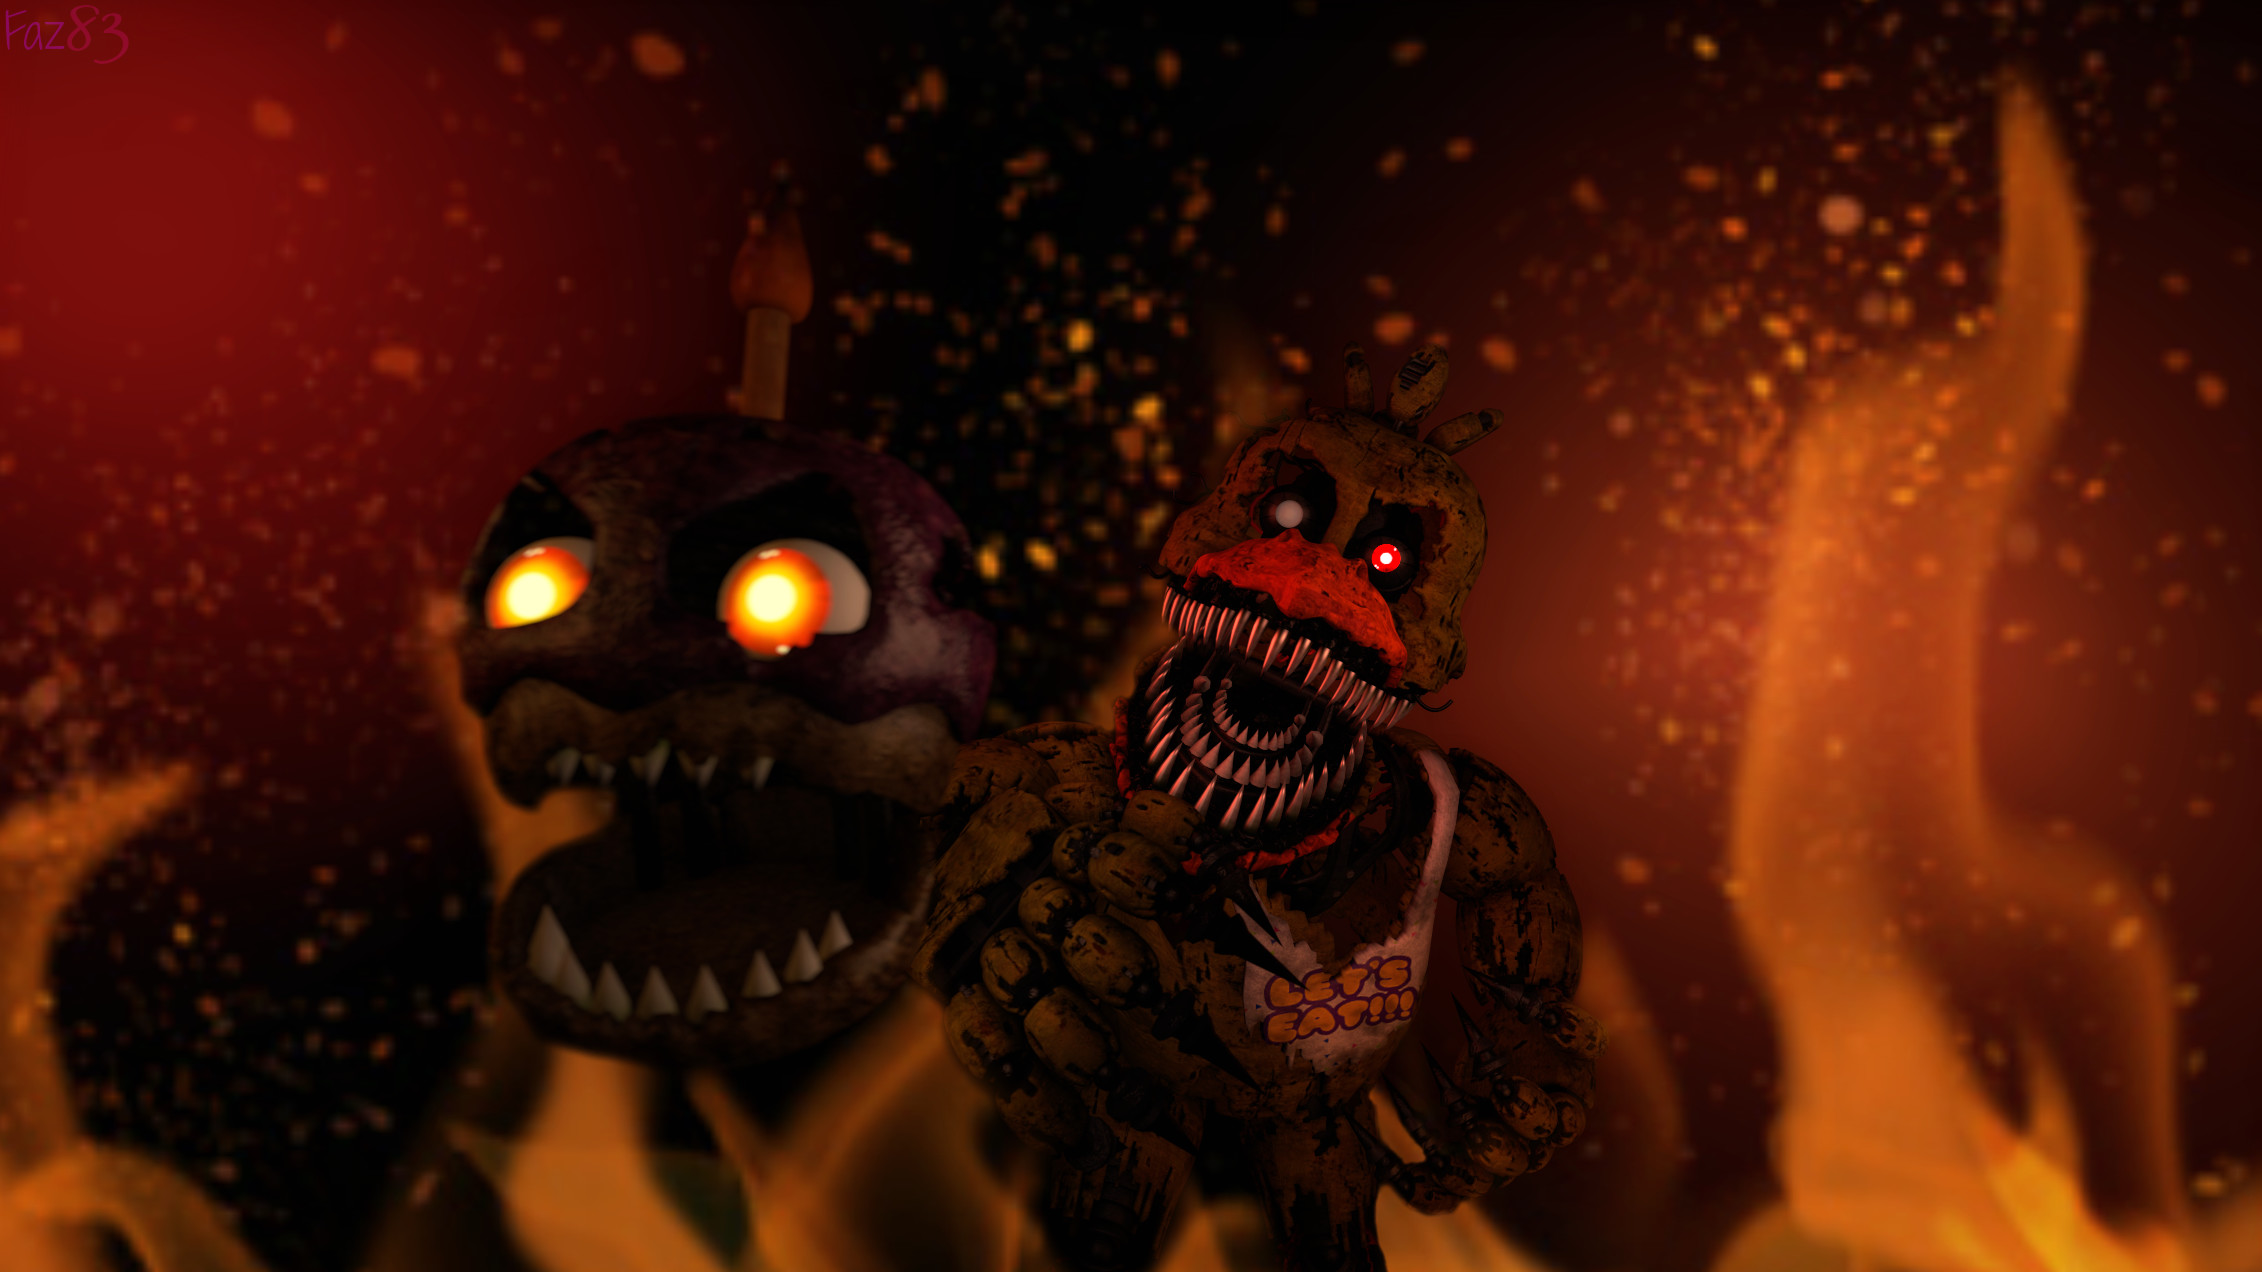 1 nightmare chica (five nights at freddy's) hd wallpapers on nightmare chica wallpapers